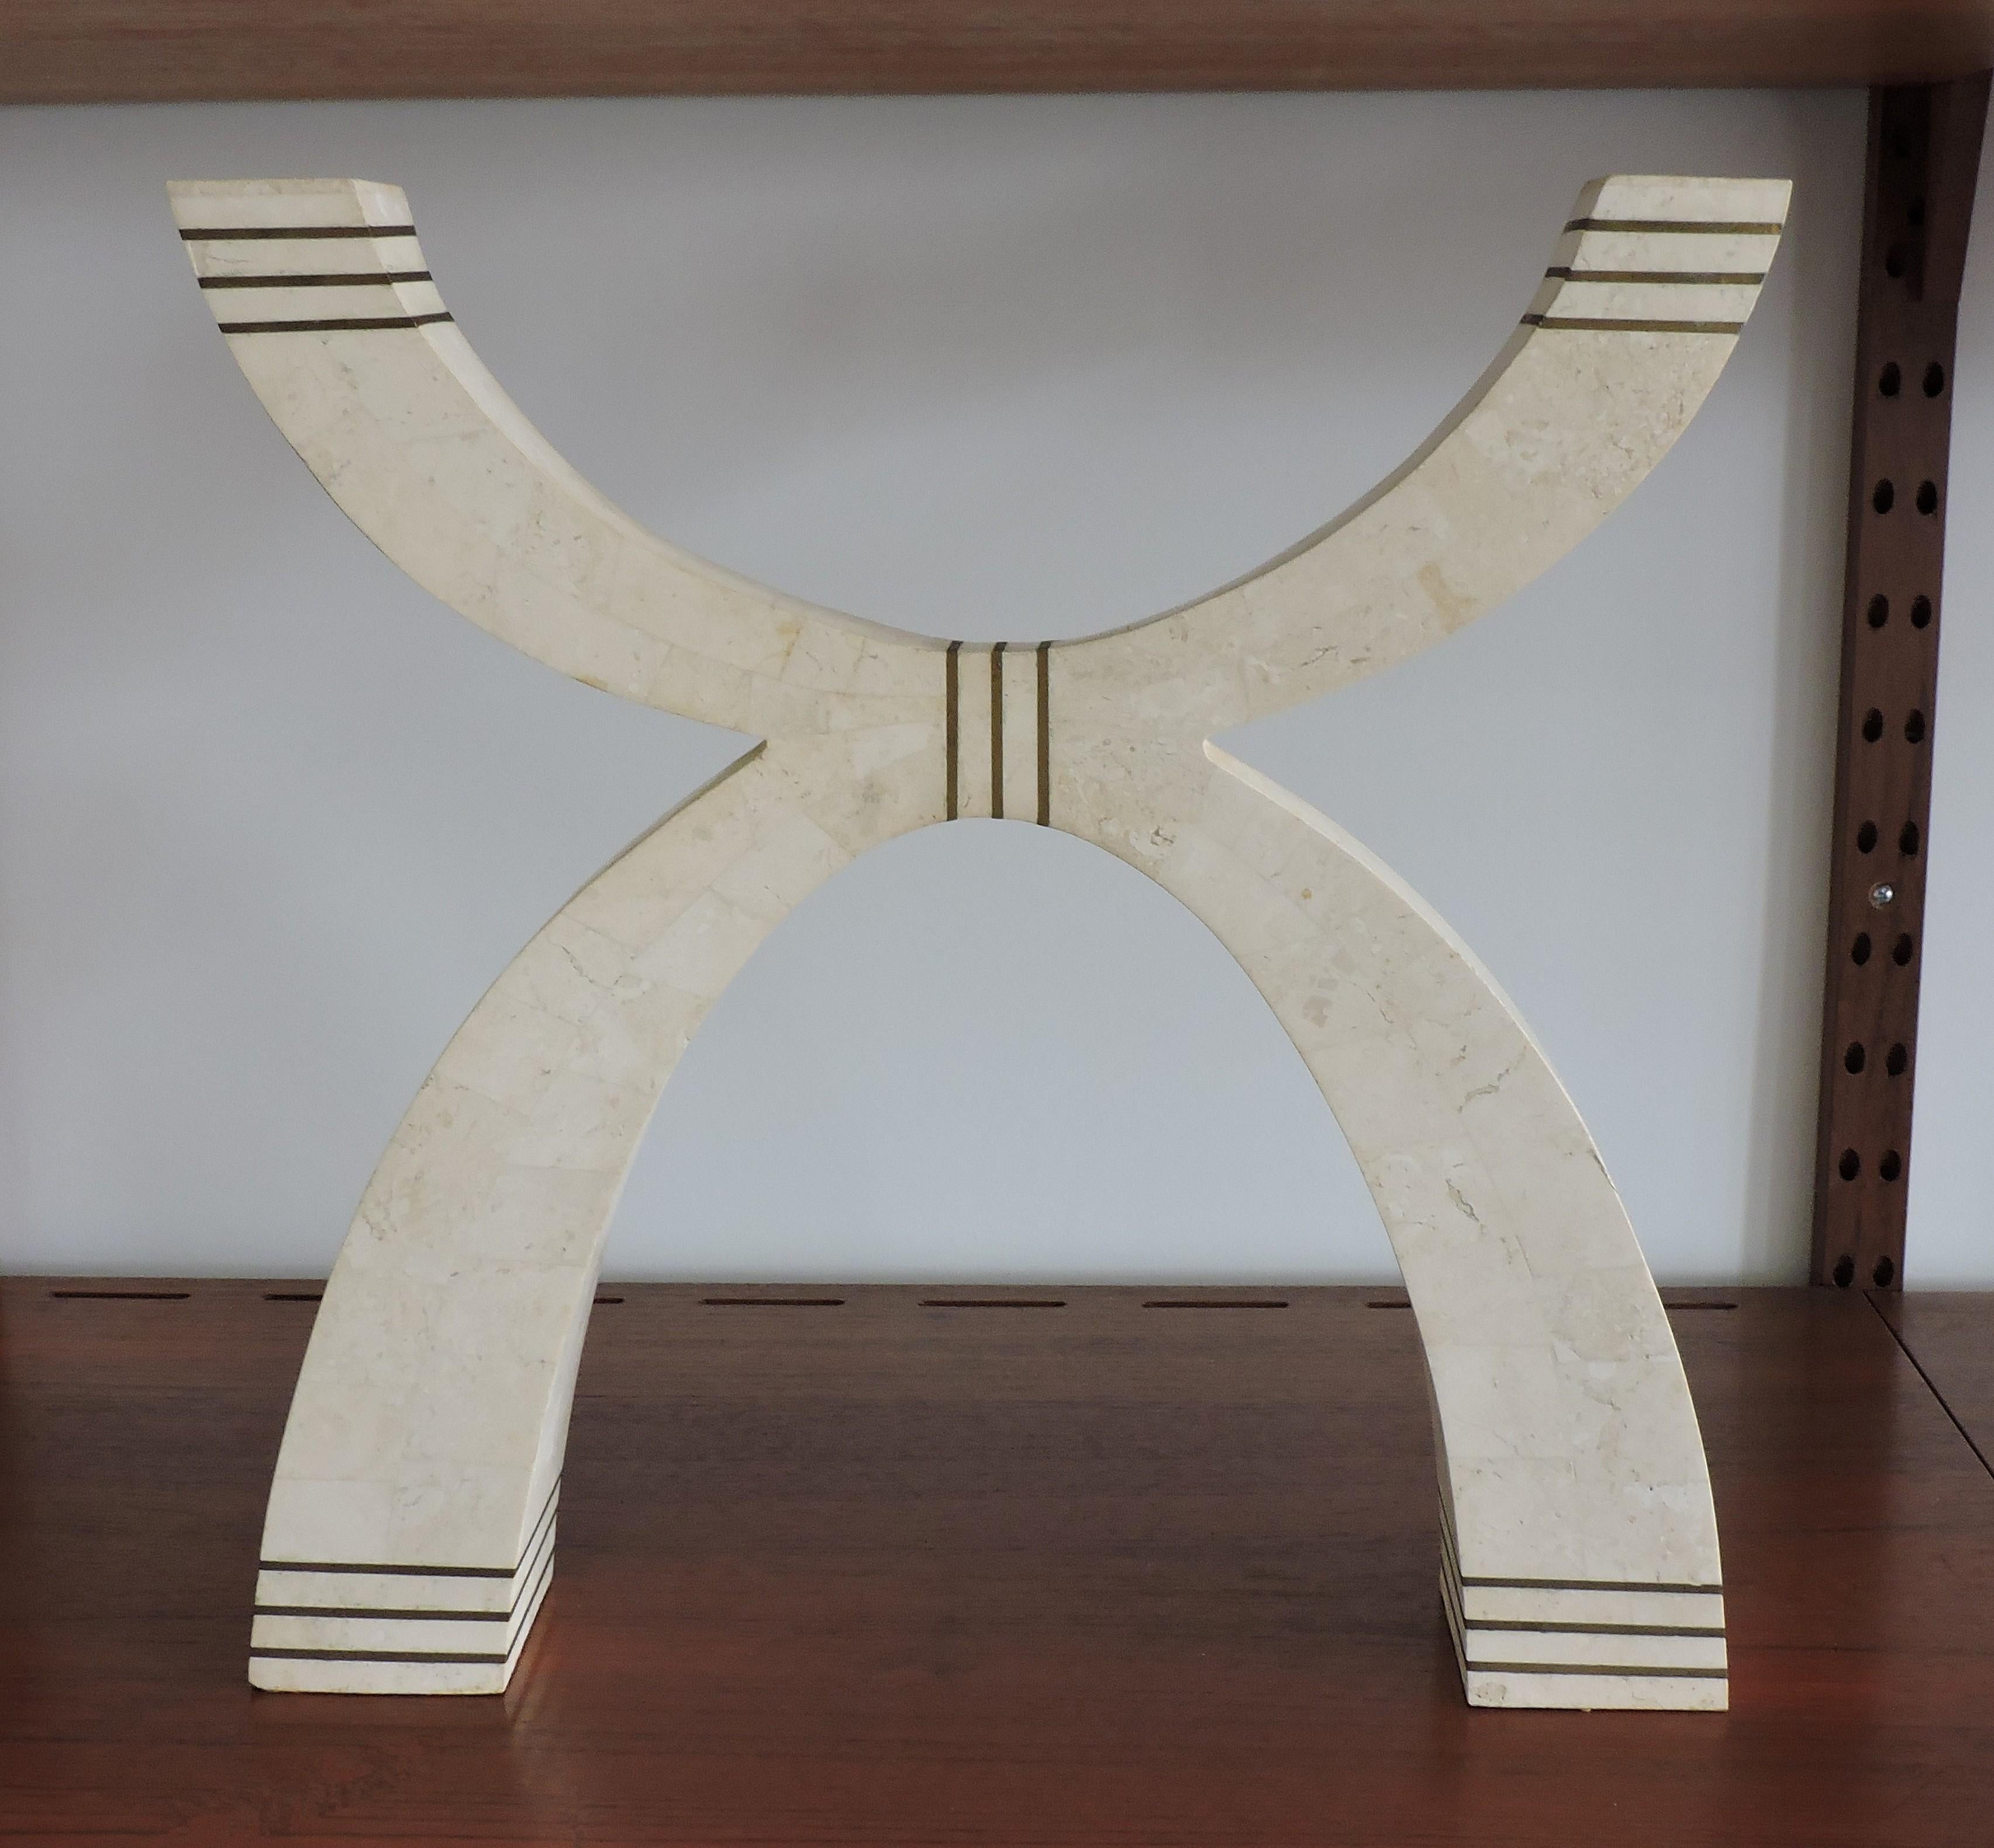 Large and striking sculptural candleholder designed by Robert Marcius and manufactured by Casa Bique. This has a dramatic double arched form and is made of light beige tessellated stone with brass inlay details. Accepts two candles.